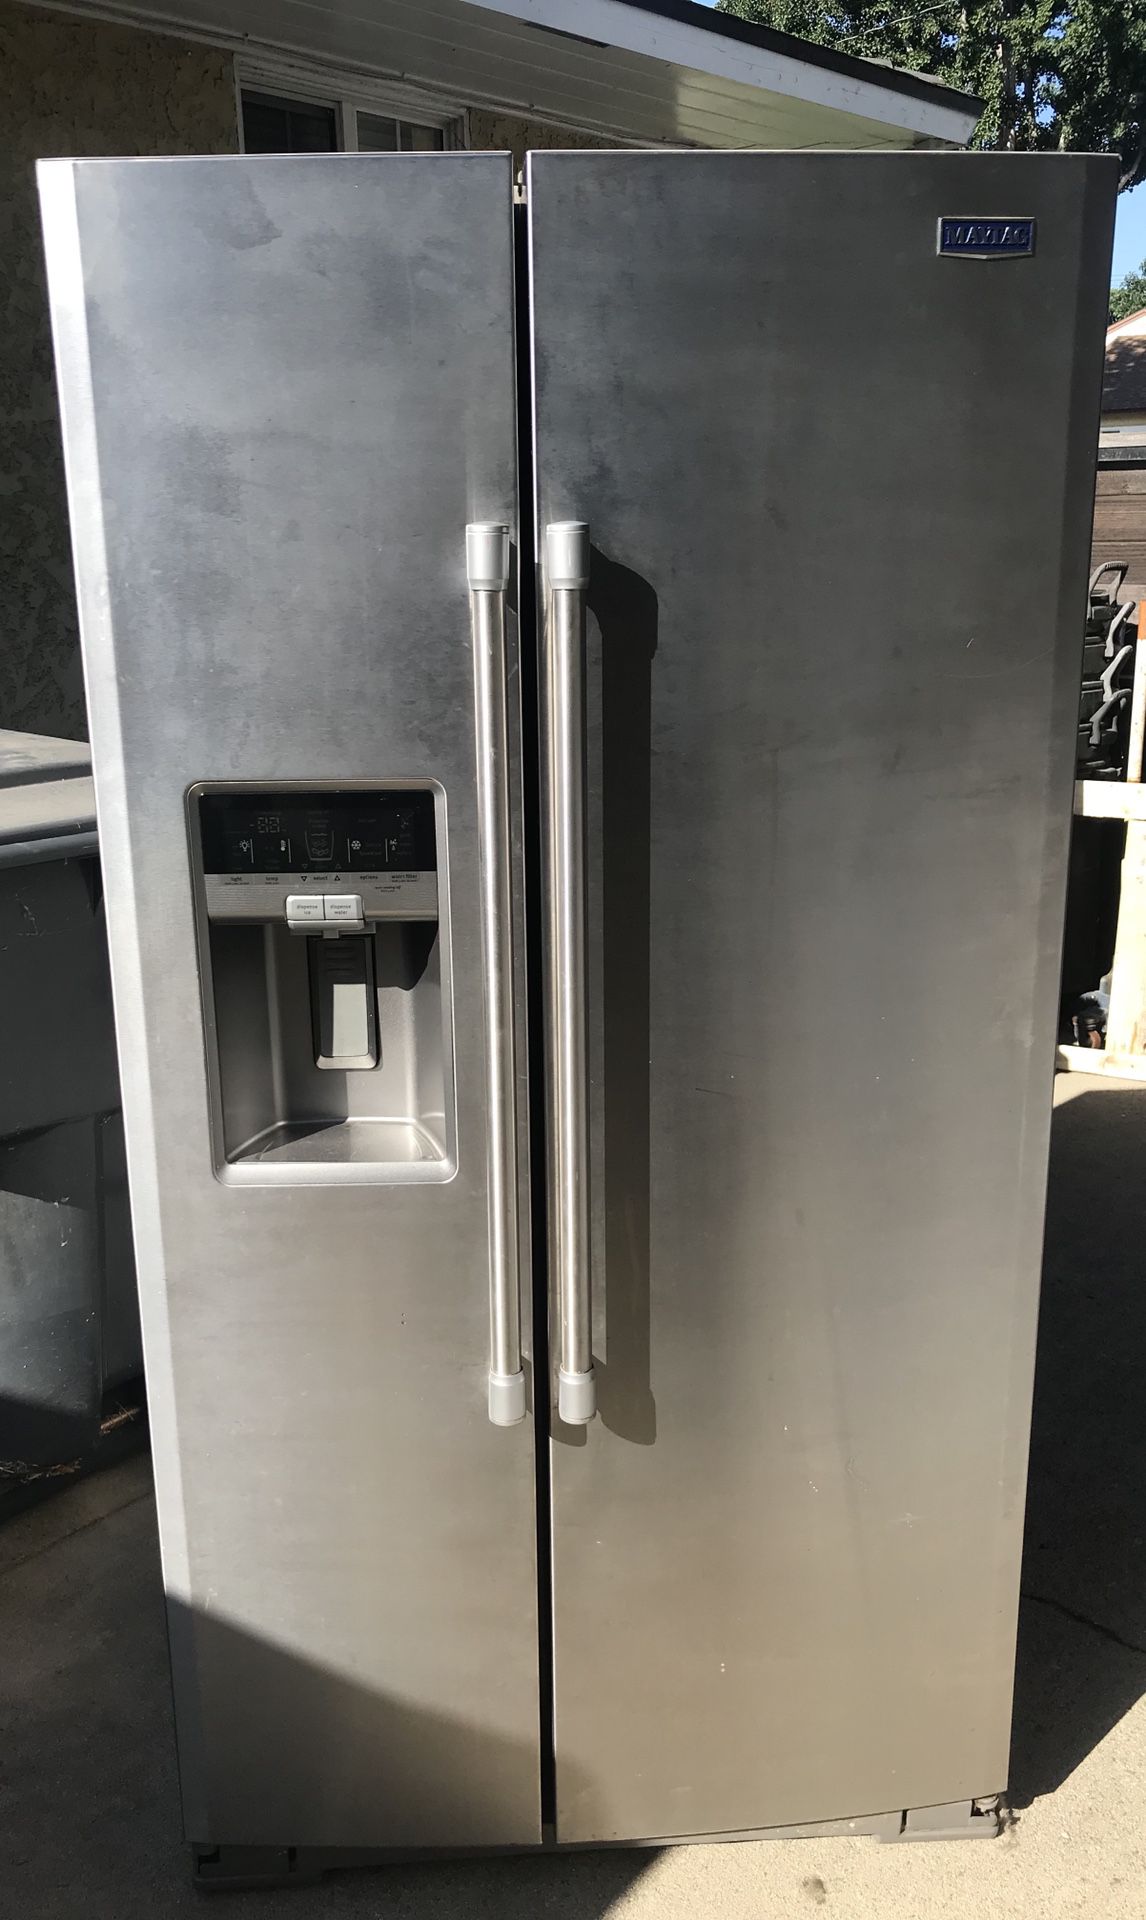 Maytag fridge side by side stainless steel refer